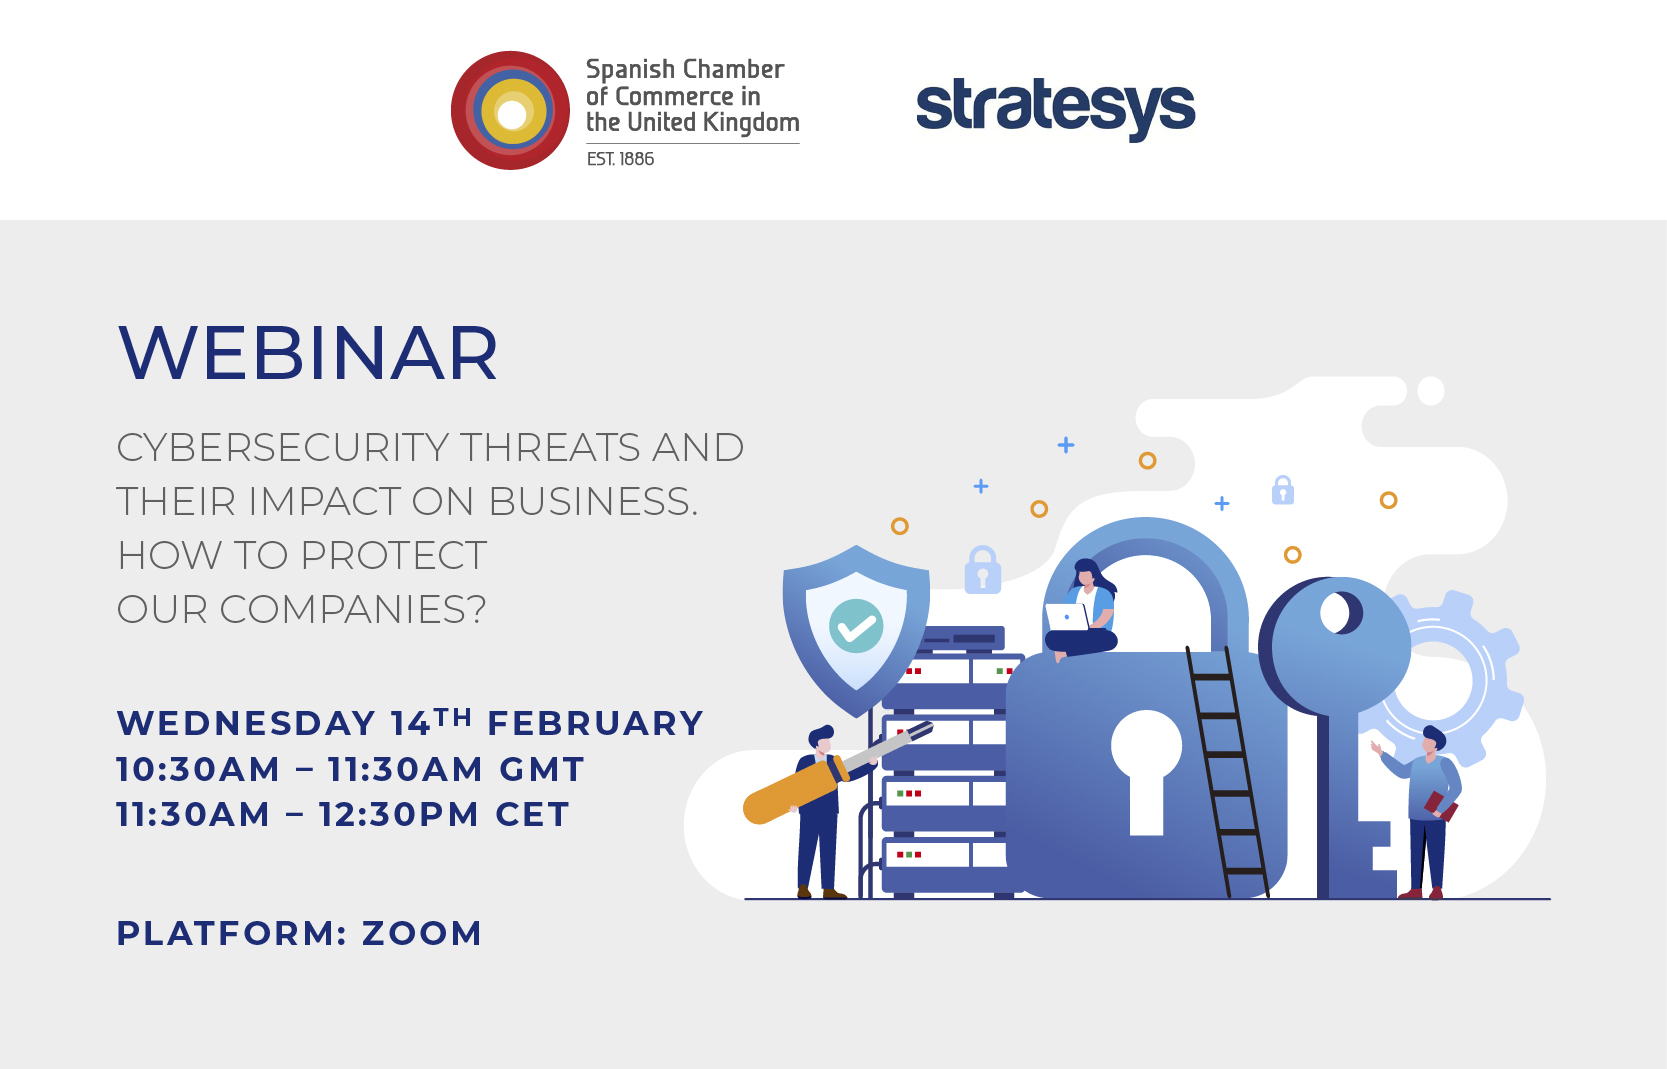 WEBINAR | CYBERSECURITY THREATS AND THEIR IMPACT ON BUSINESS. HOW TO PROTECT OUR COMPANIES?